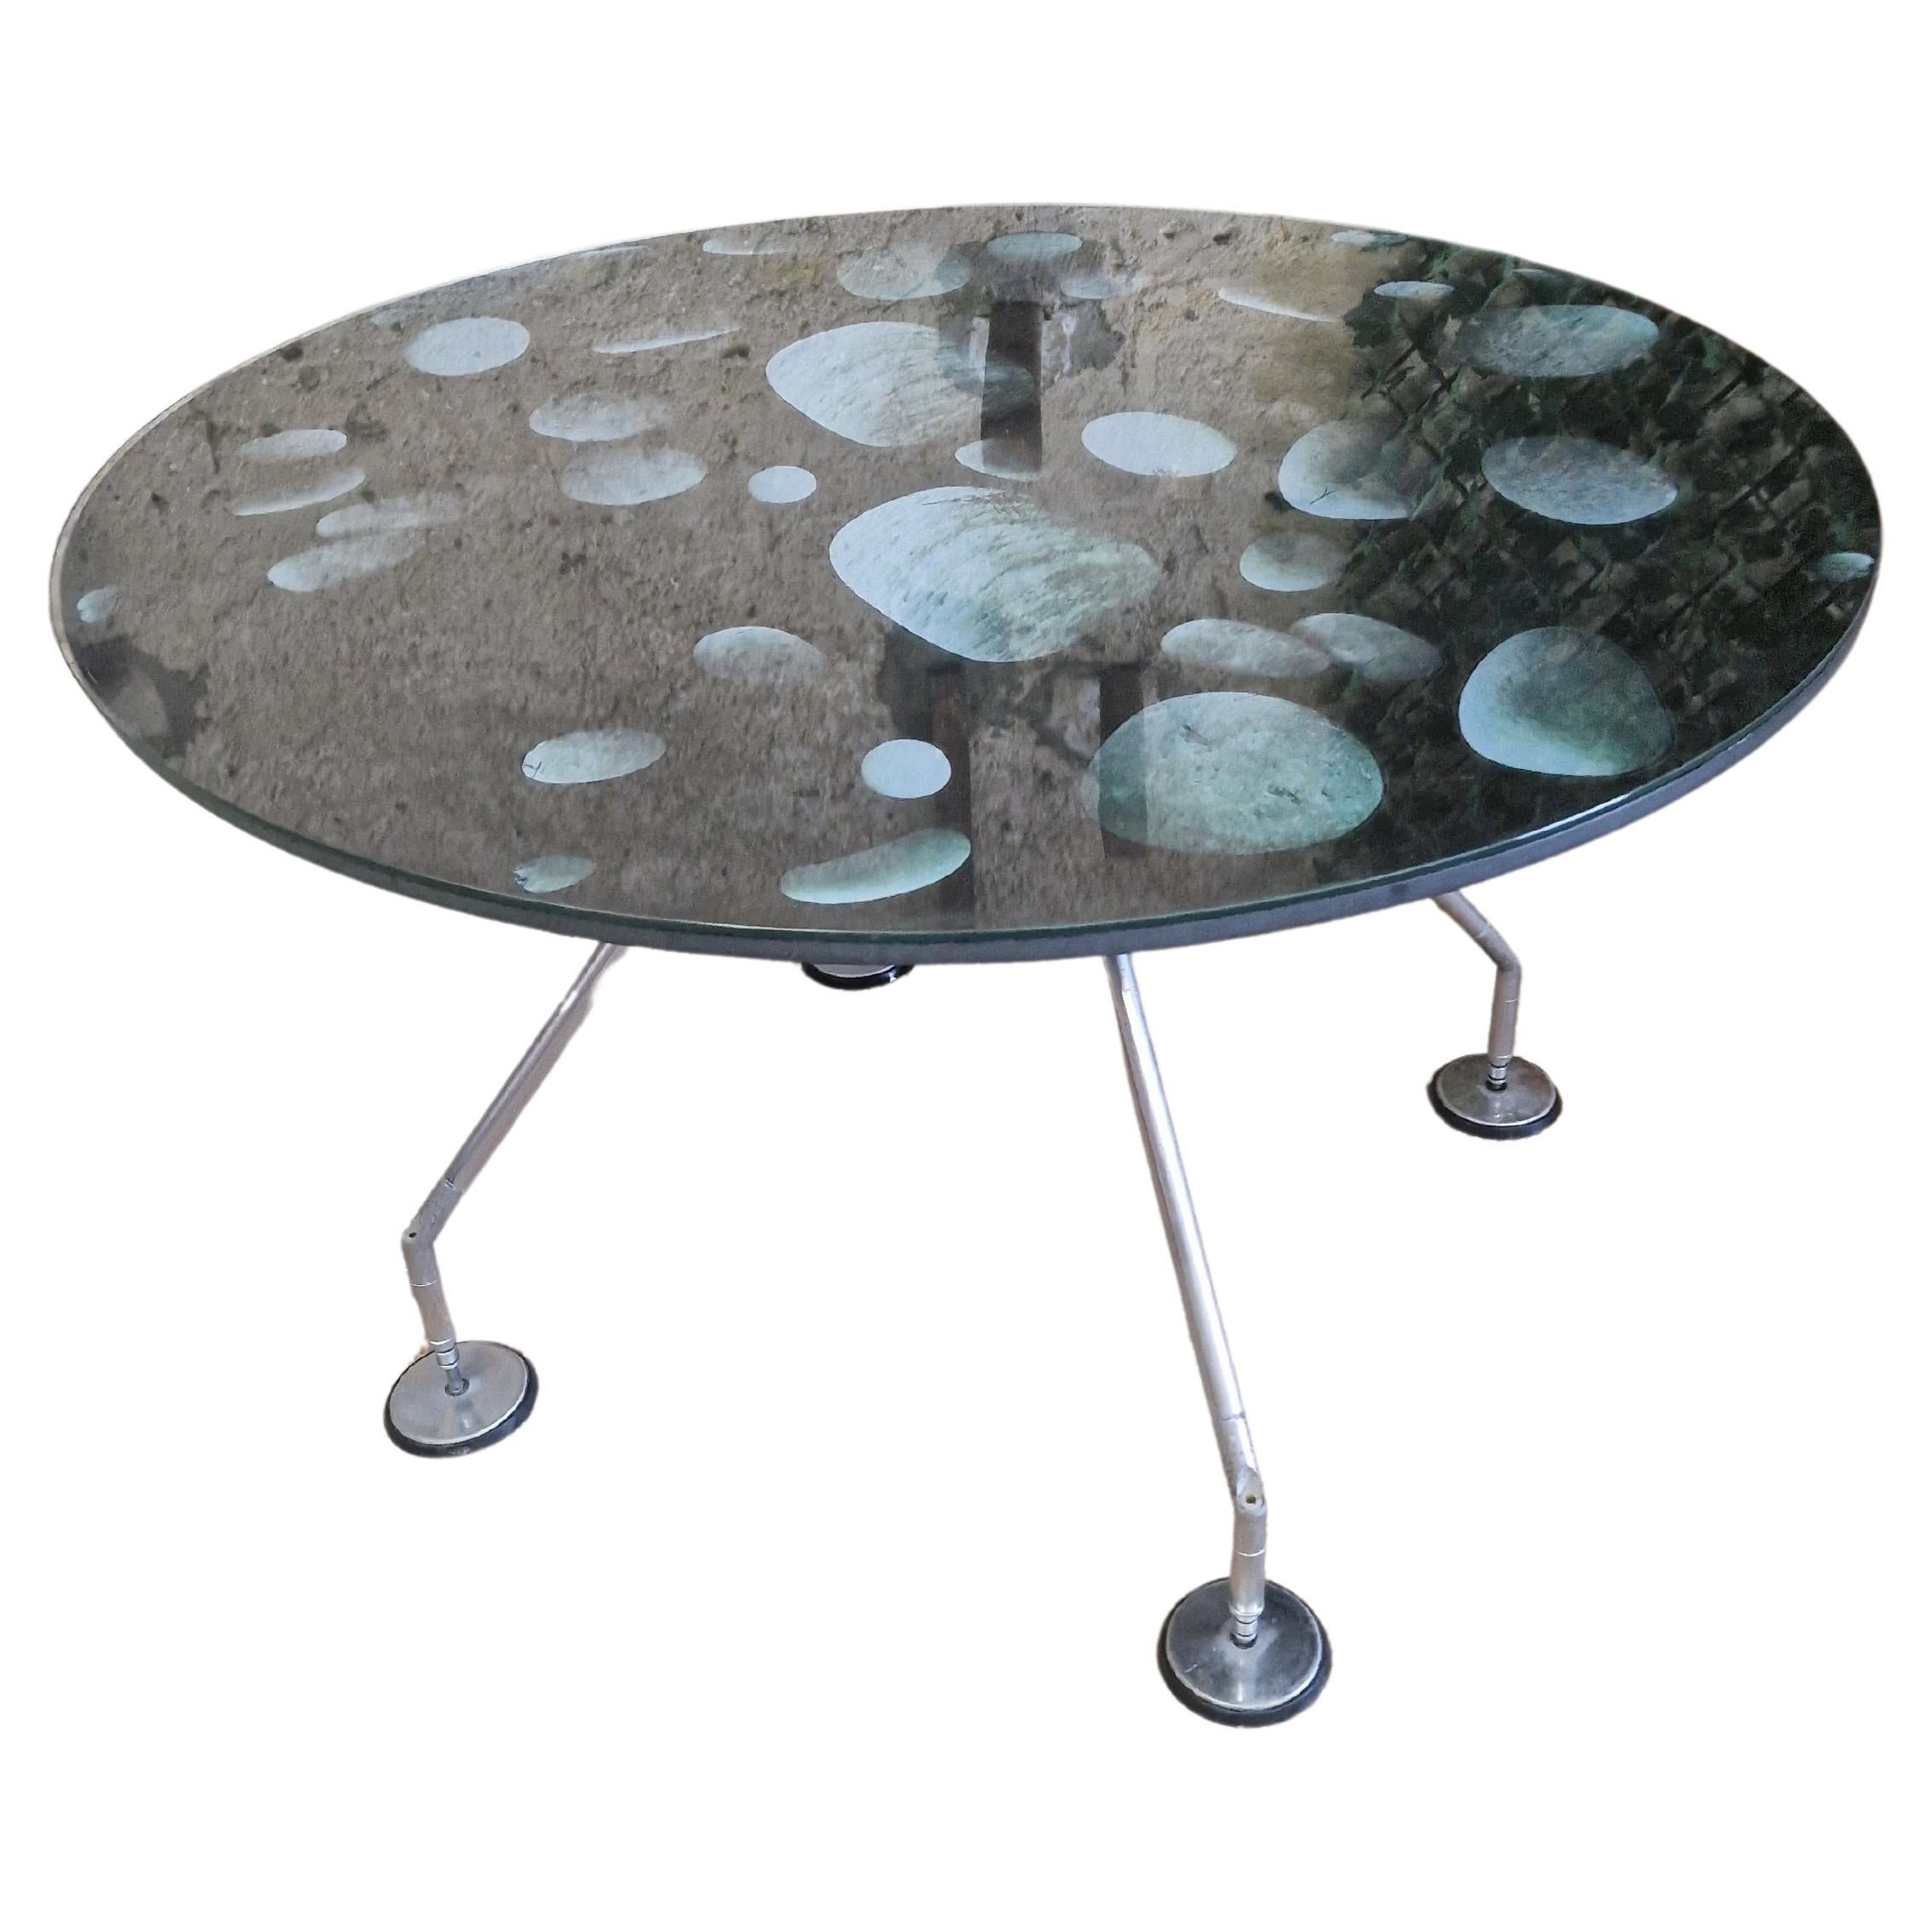 Vintage Table Sir Norman Foster 1935 Techno Edition with Pebbles